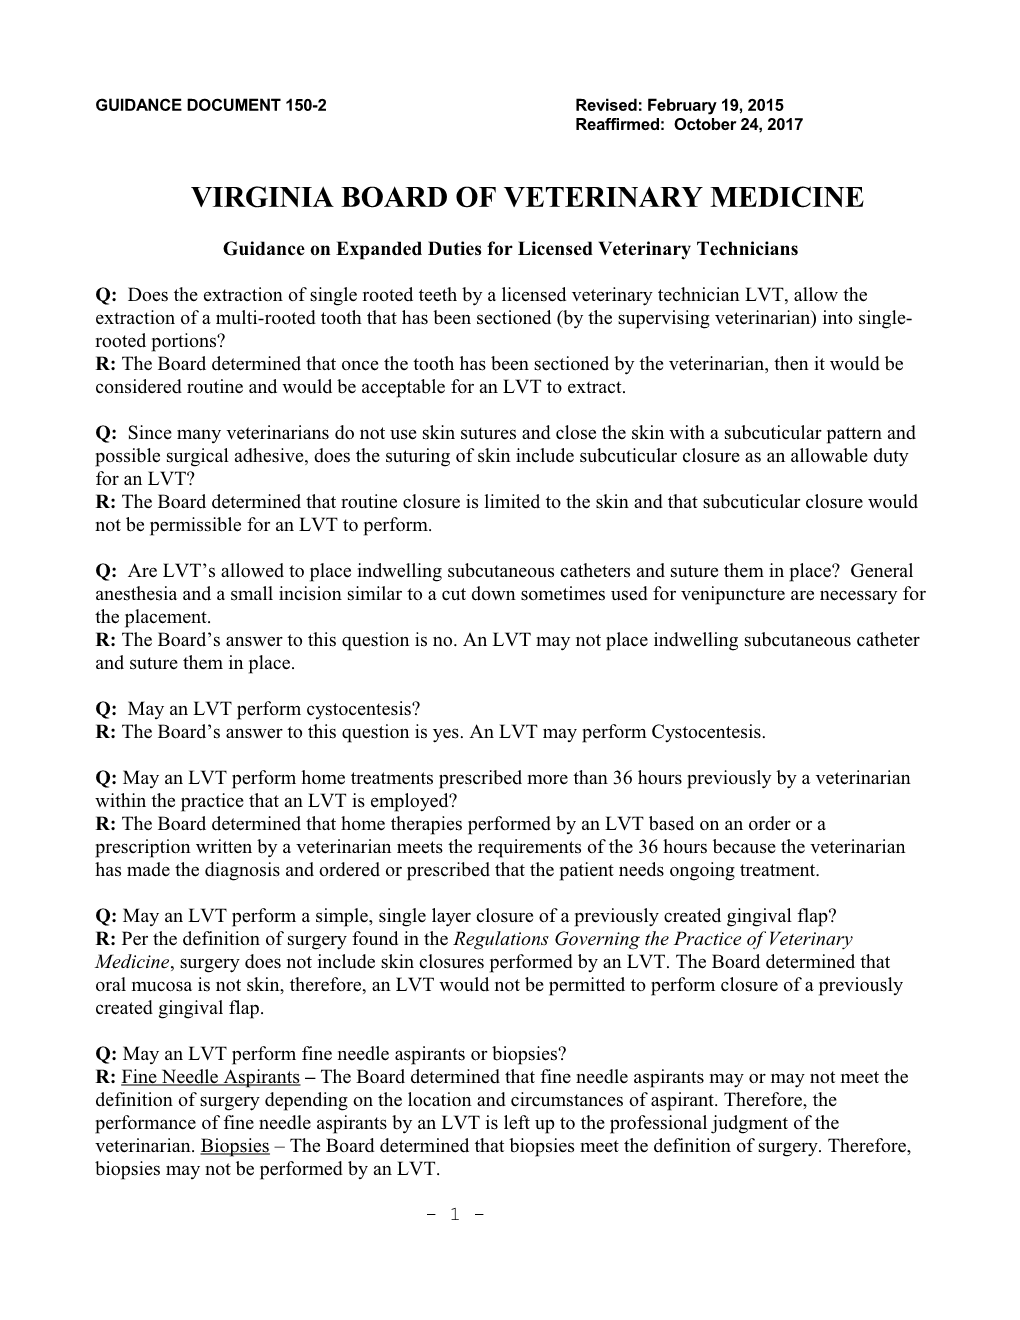 Guidance Document 150-2 - Guidance on Expanded Duties for Licensed Veterinary Technicians